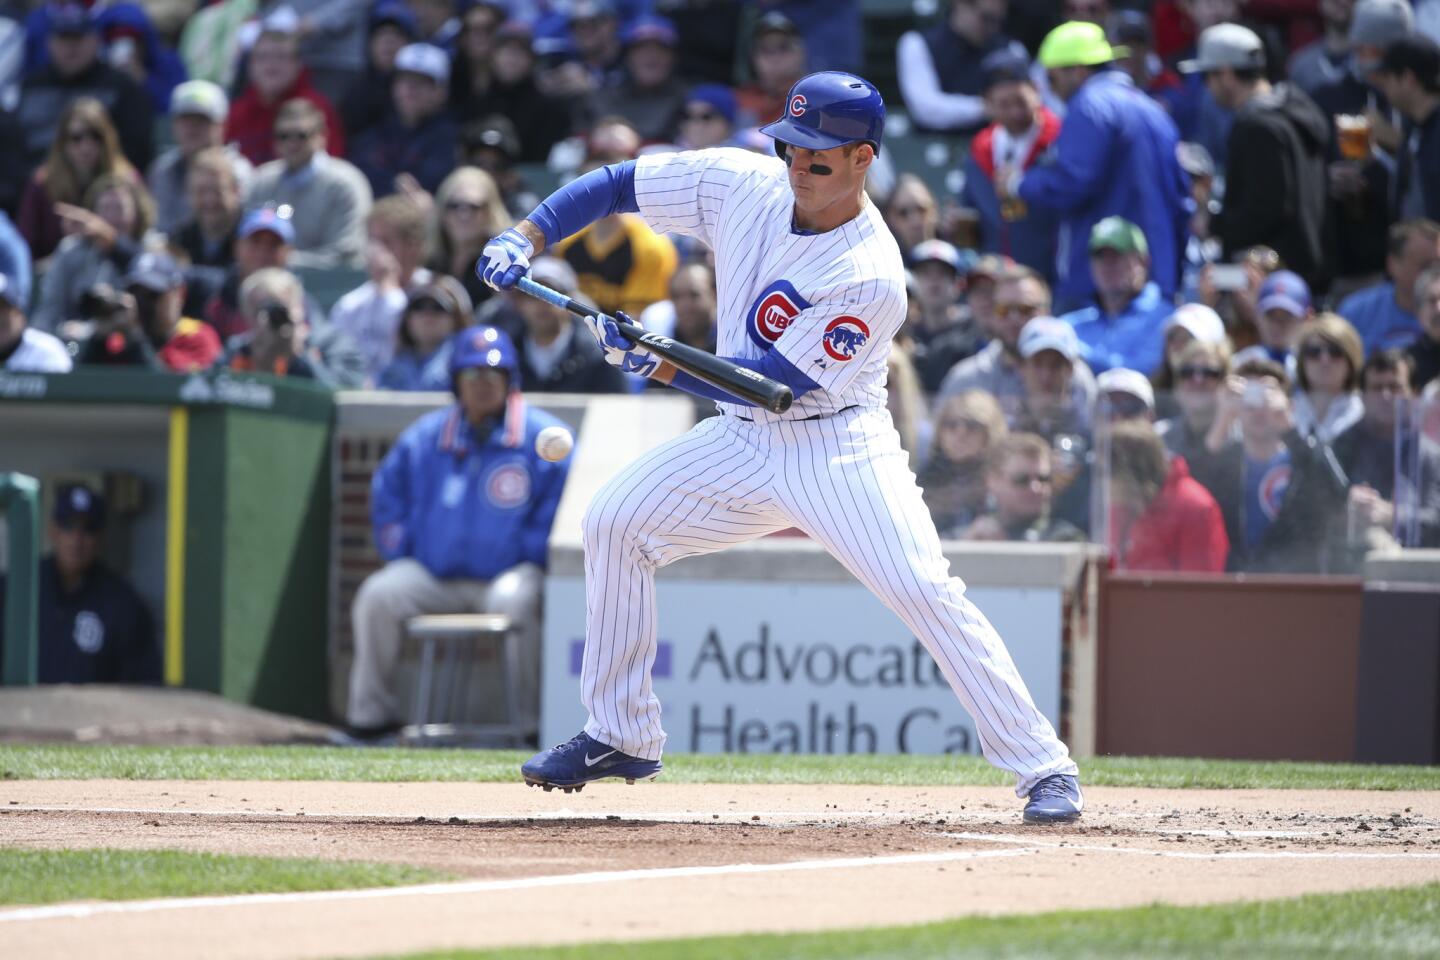 Cubs 7, Padres 6 (11 innings)